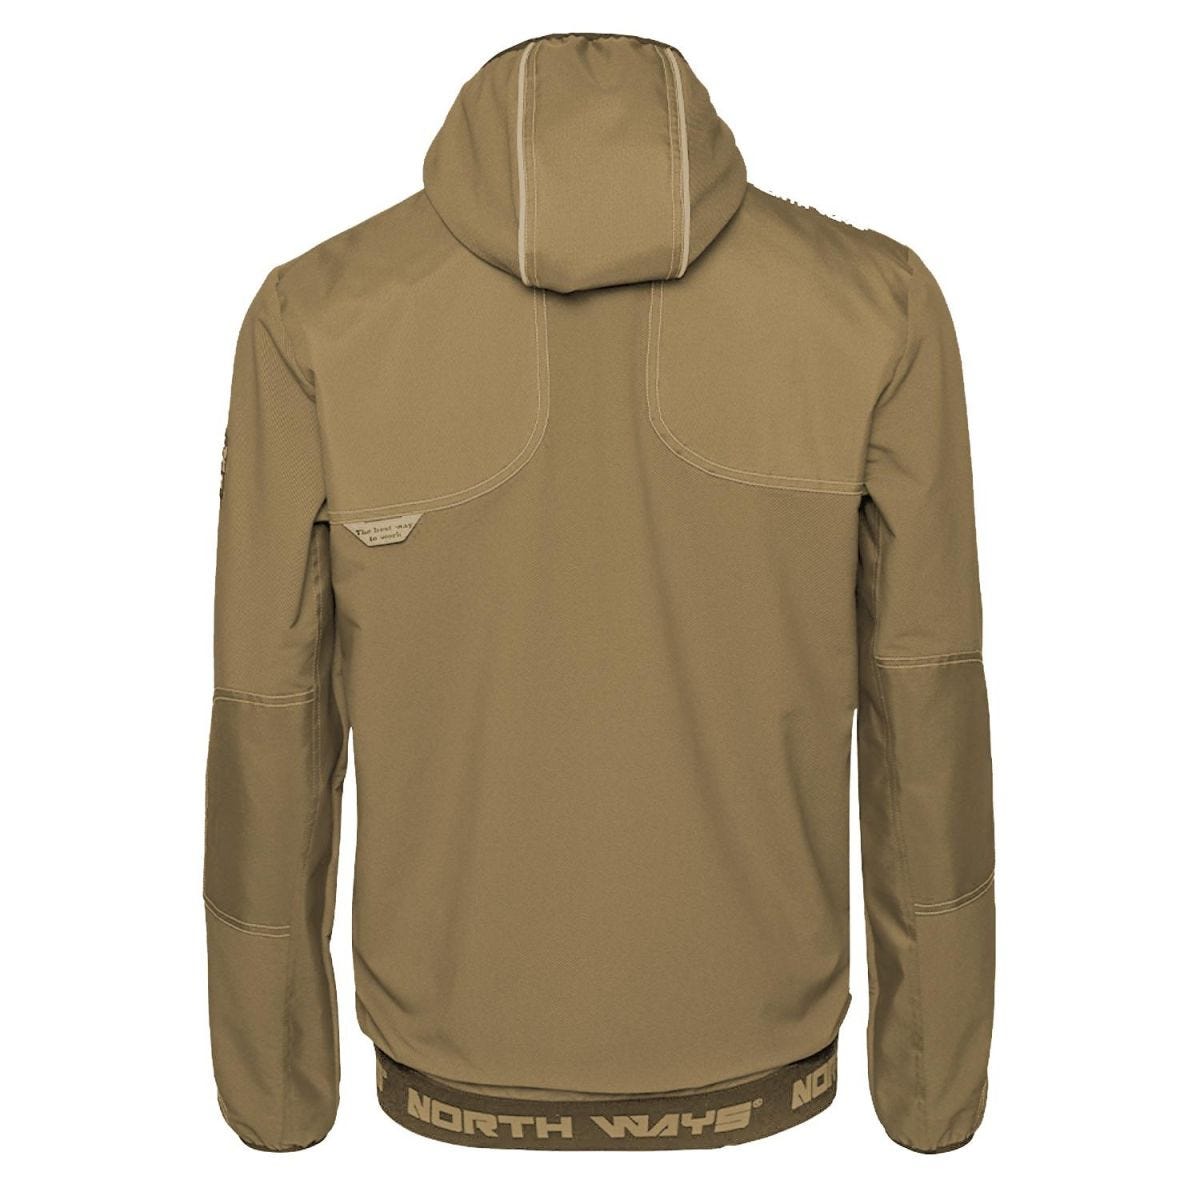 Blouson de travail multipoches Irons beige - North Ways - Taille 2XL 2